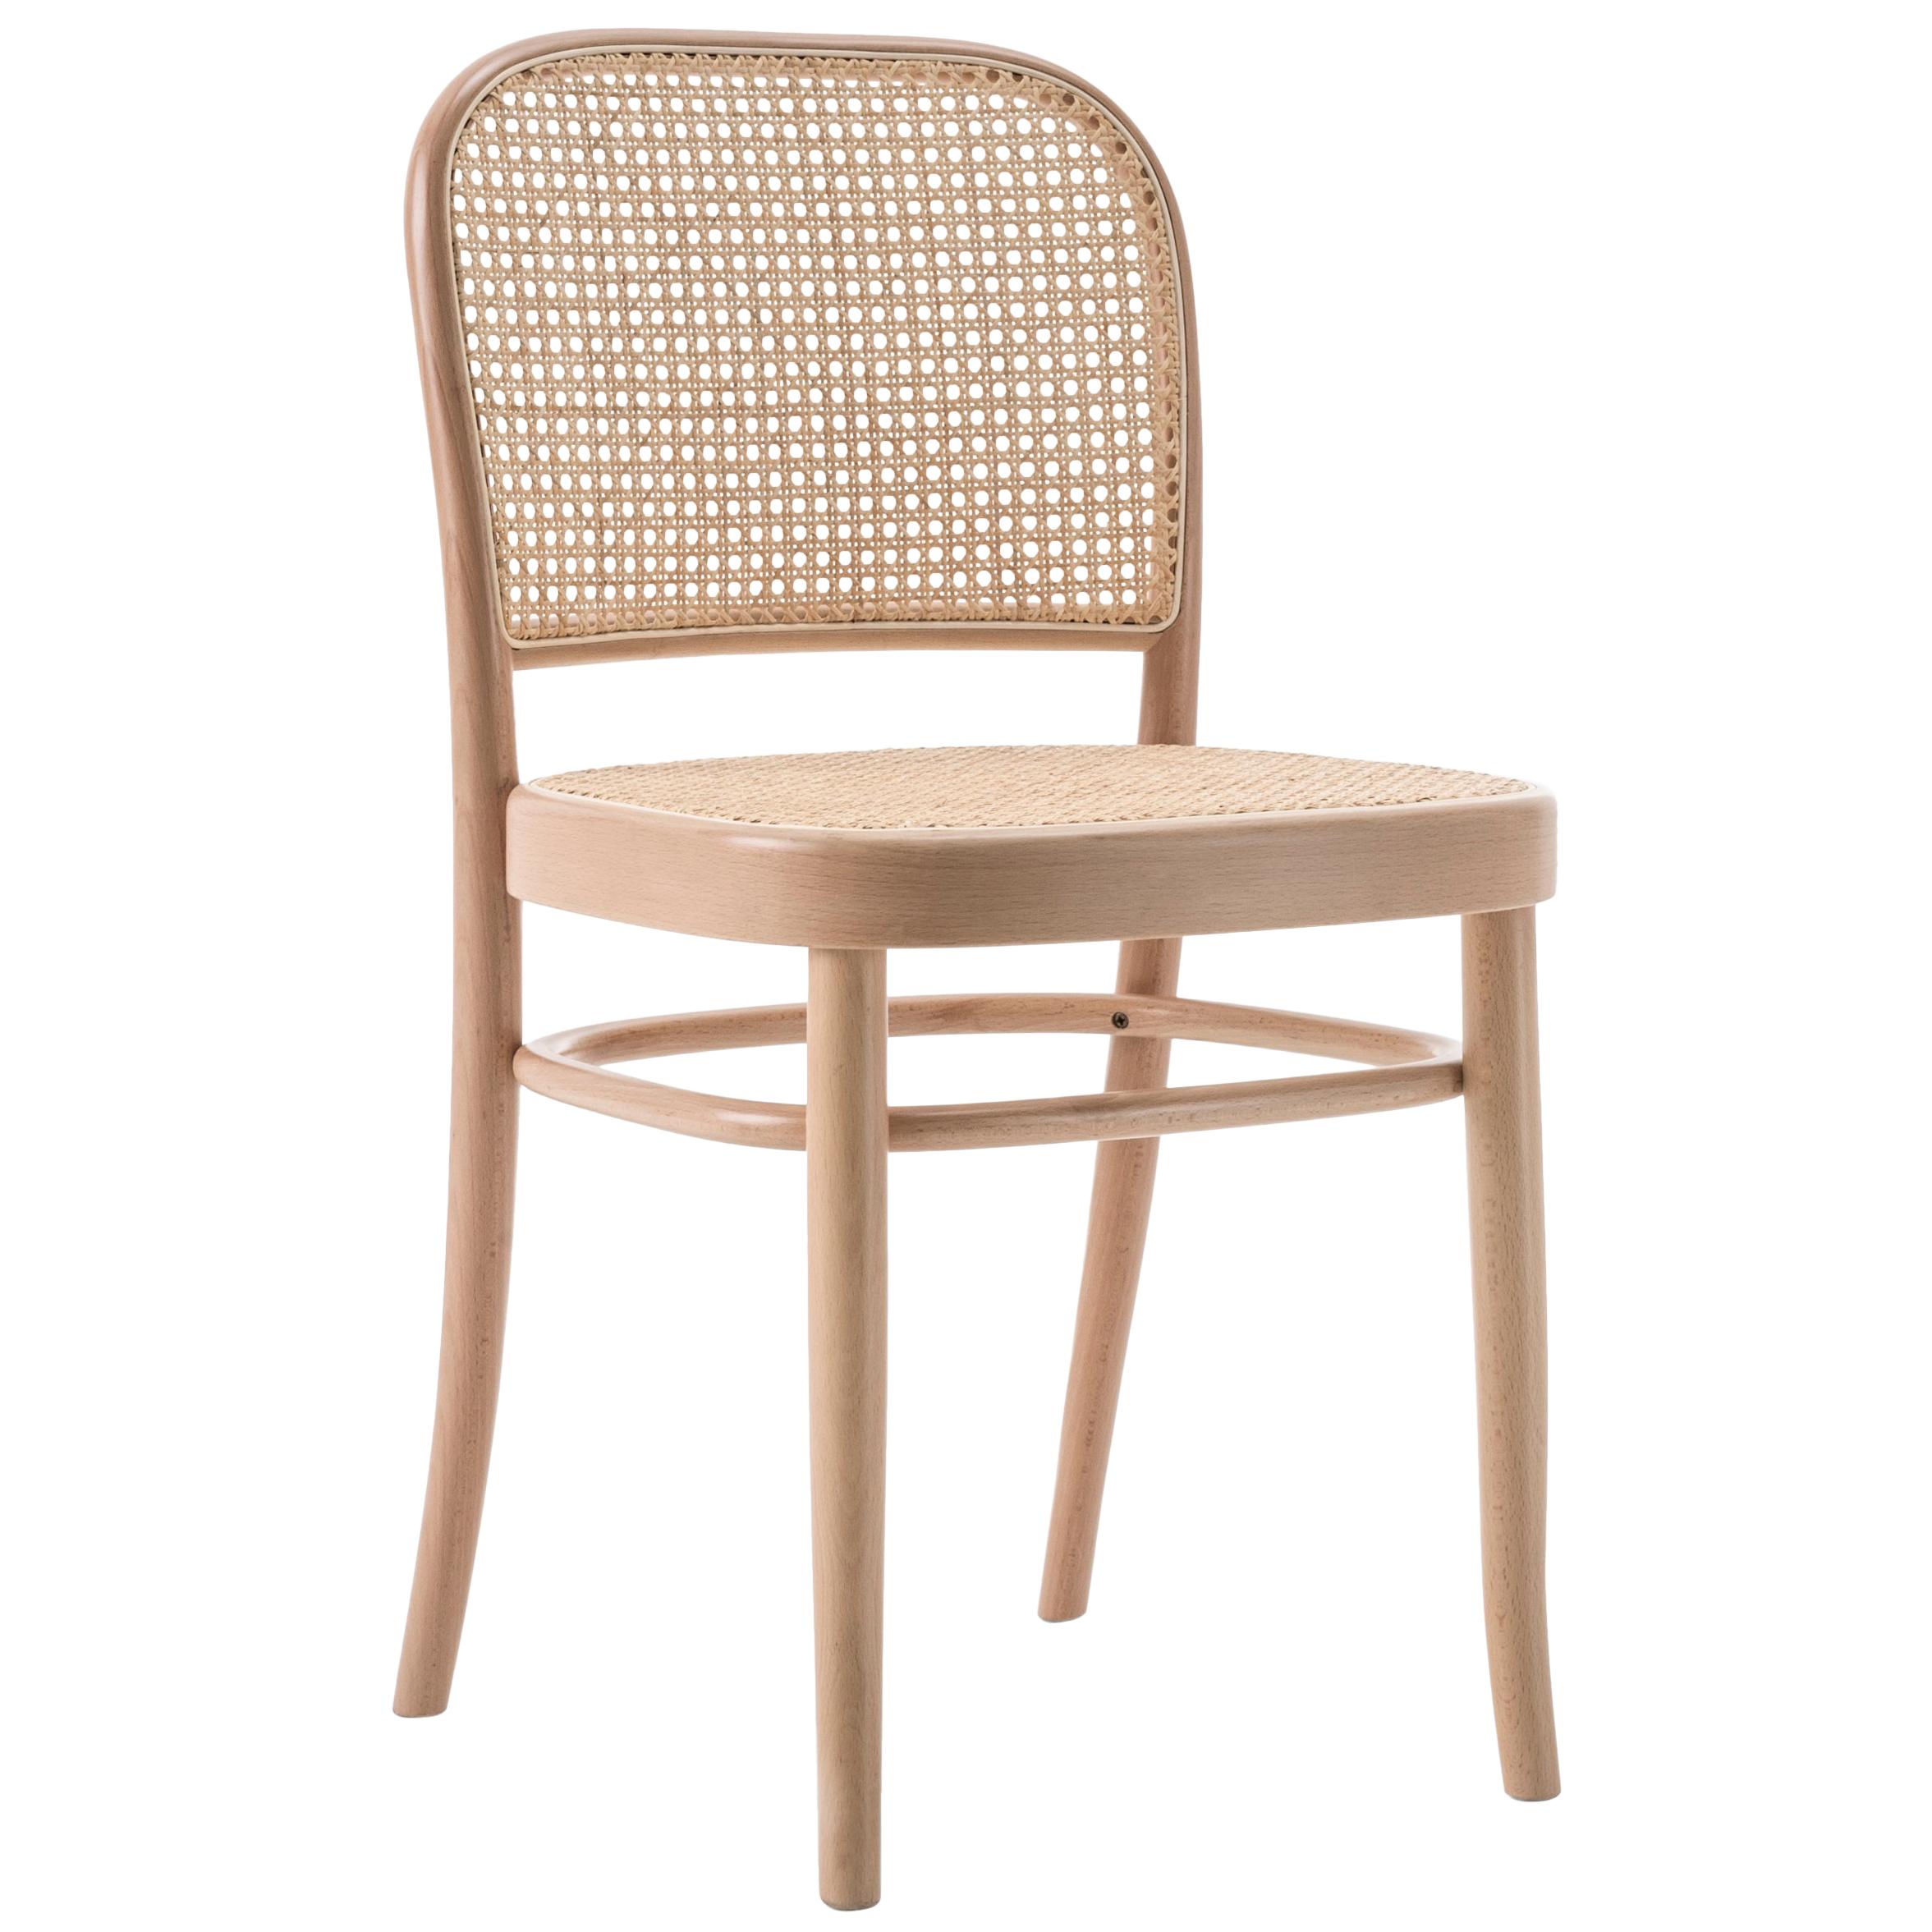 Gebrüder Thonet Vienna GmbH N.811 Chair in Beechwood with Cane Seat For Sale